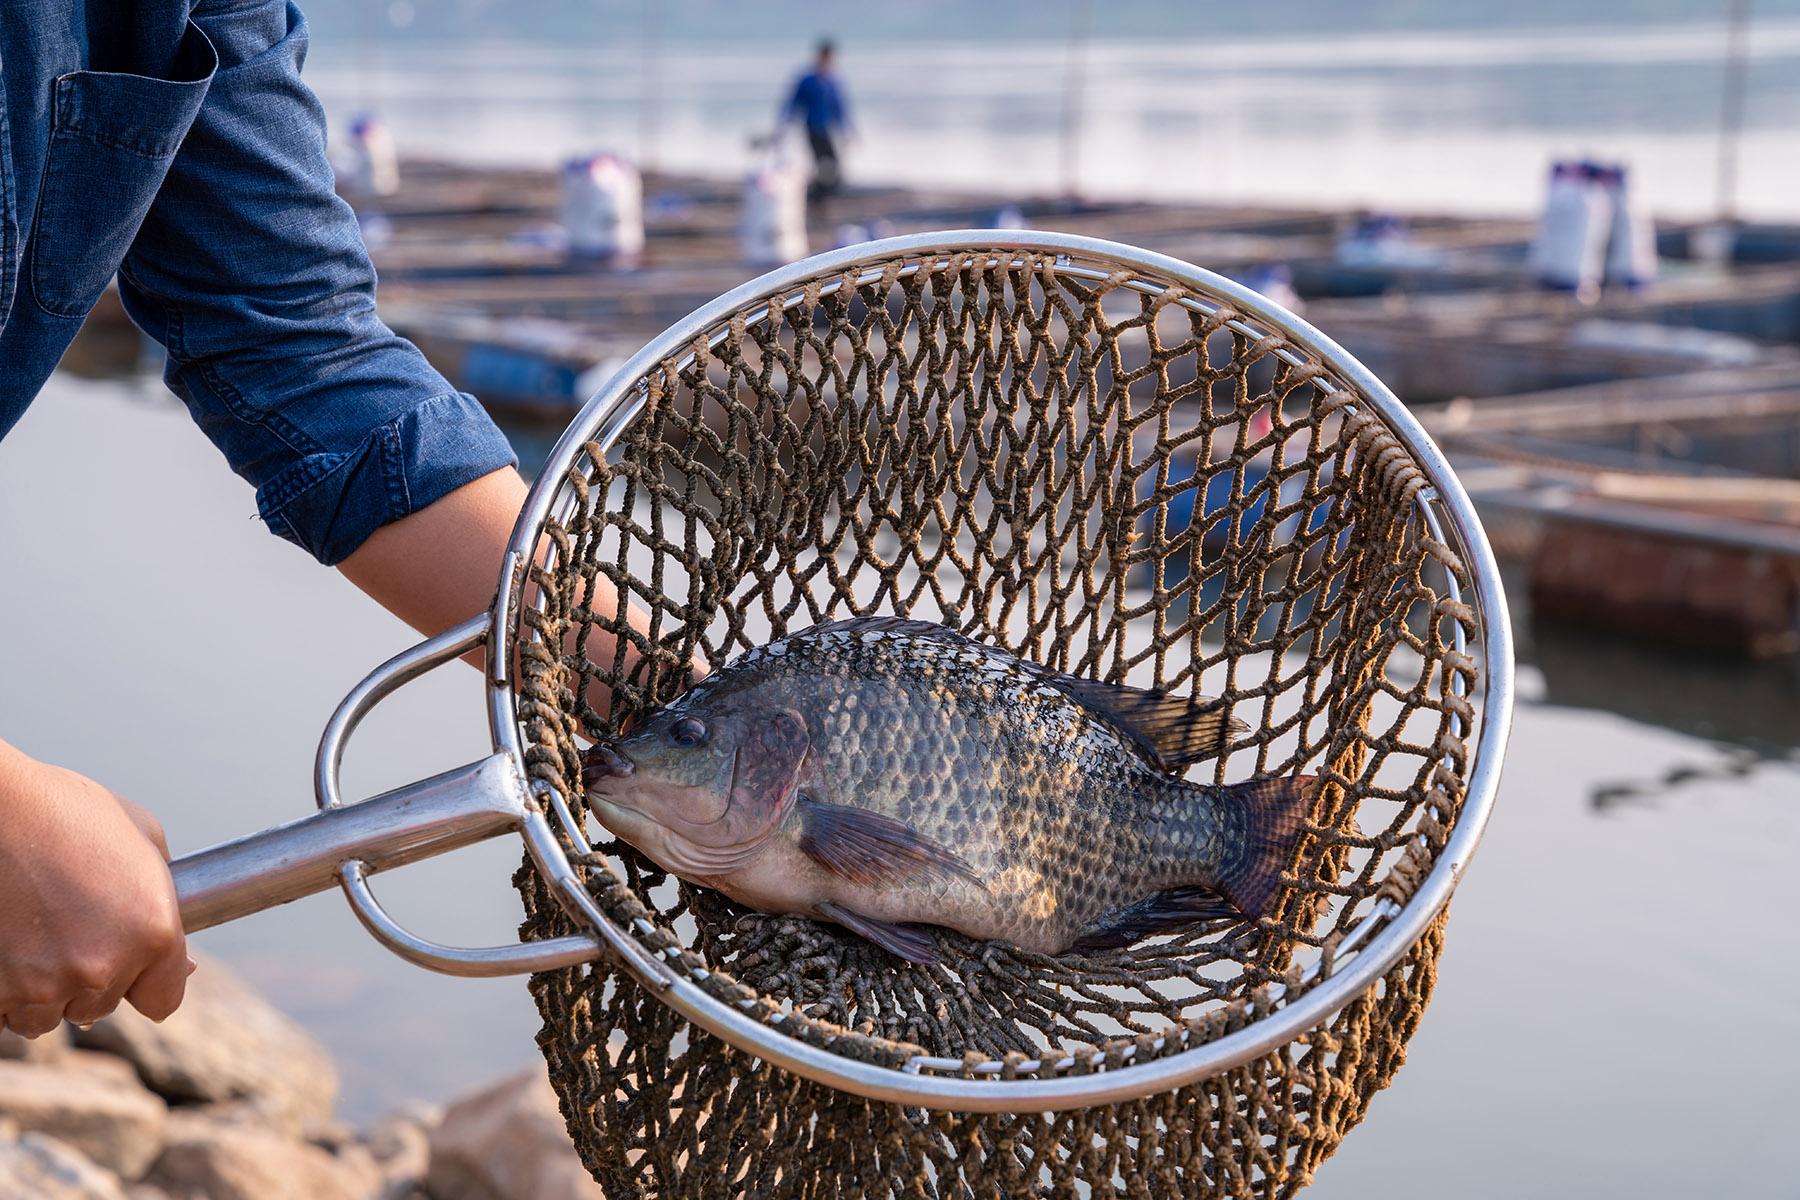 Improving aquaculture with genomics resources for breeders